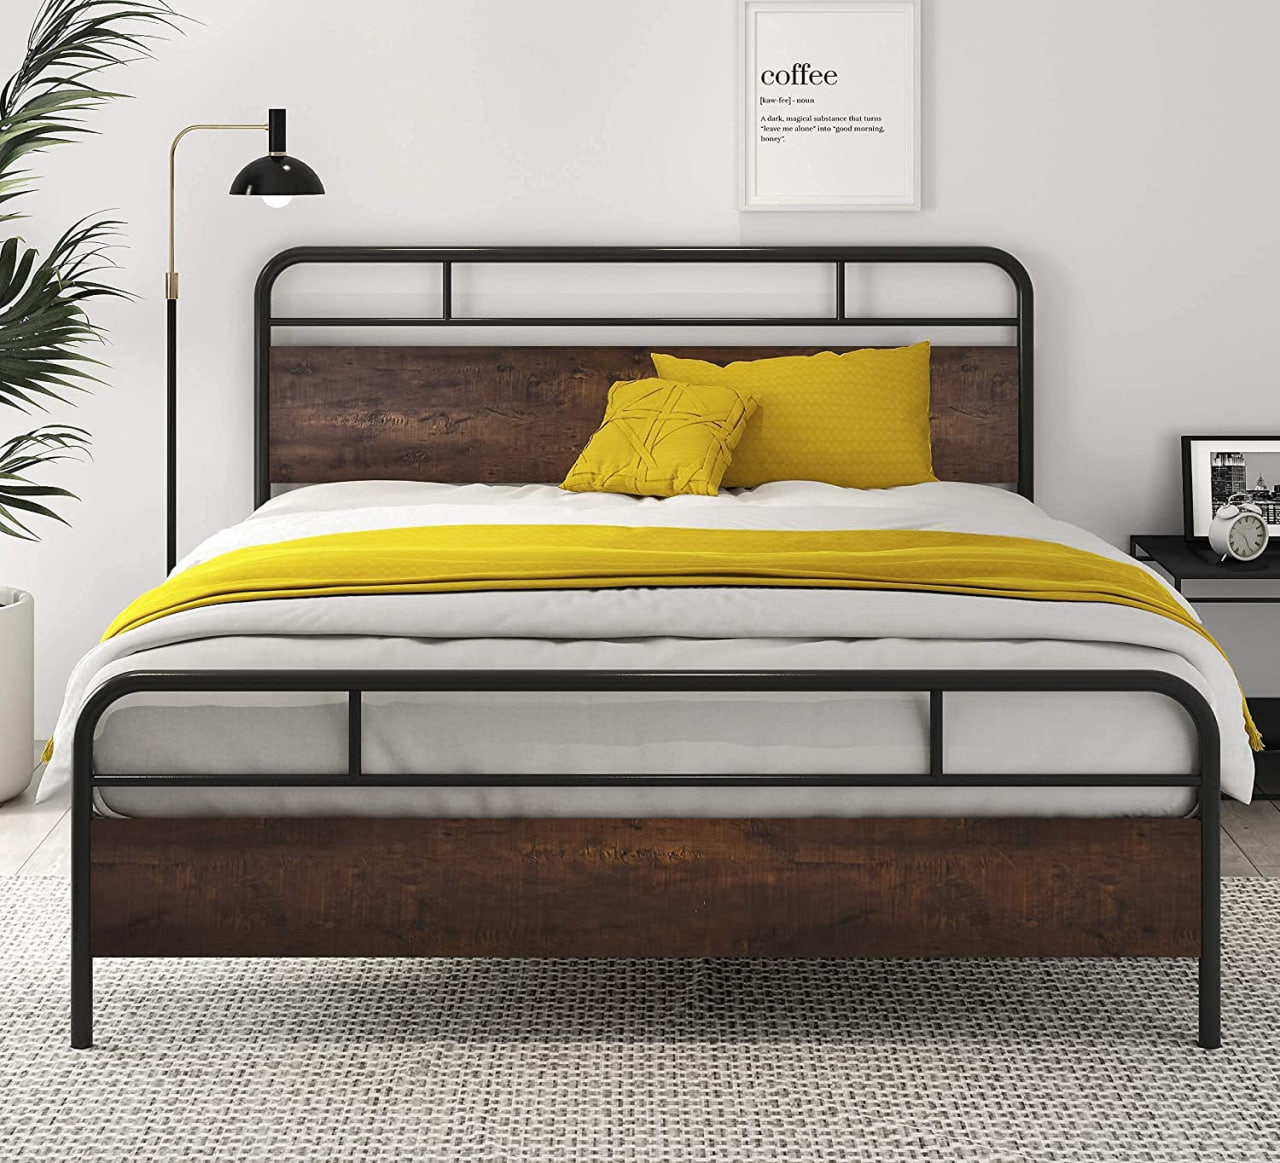 how to connect a headboard to a bed frame